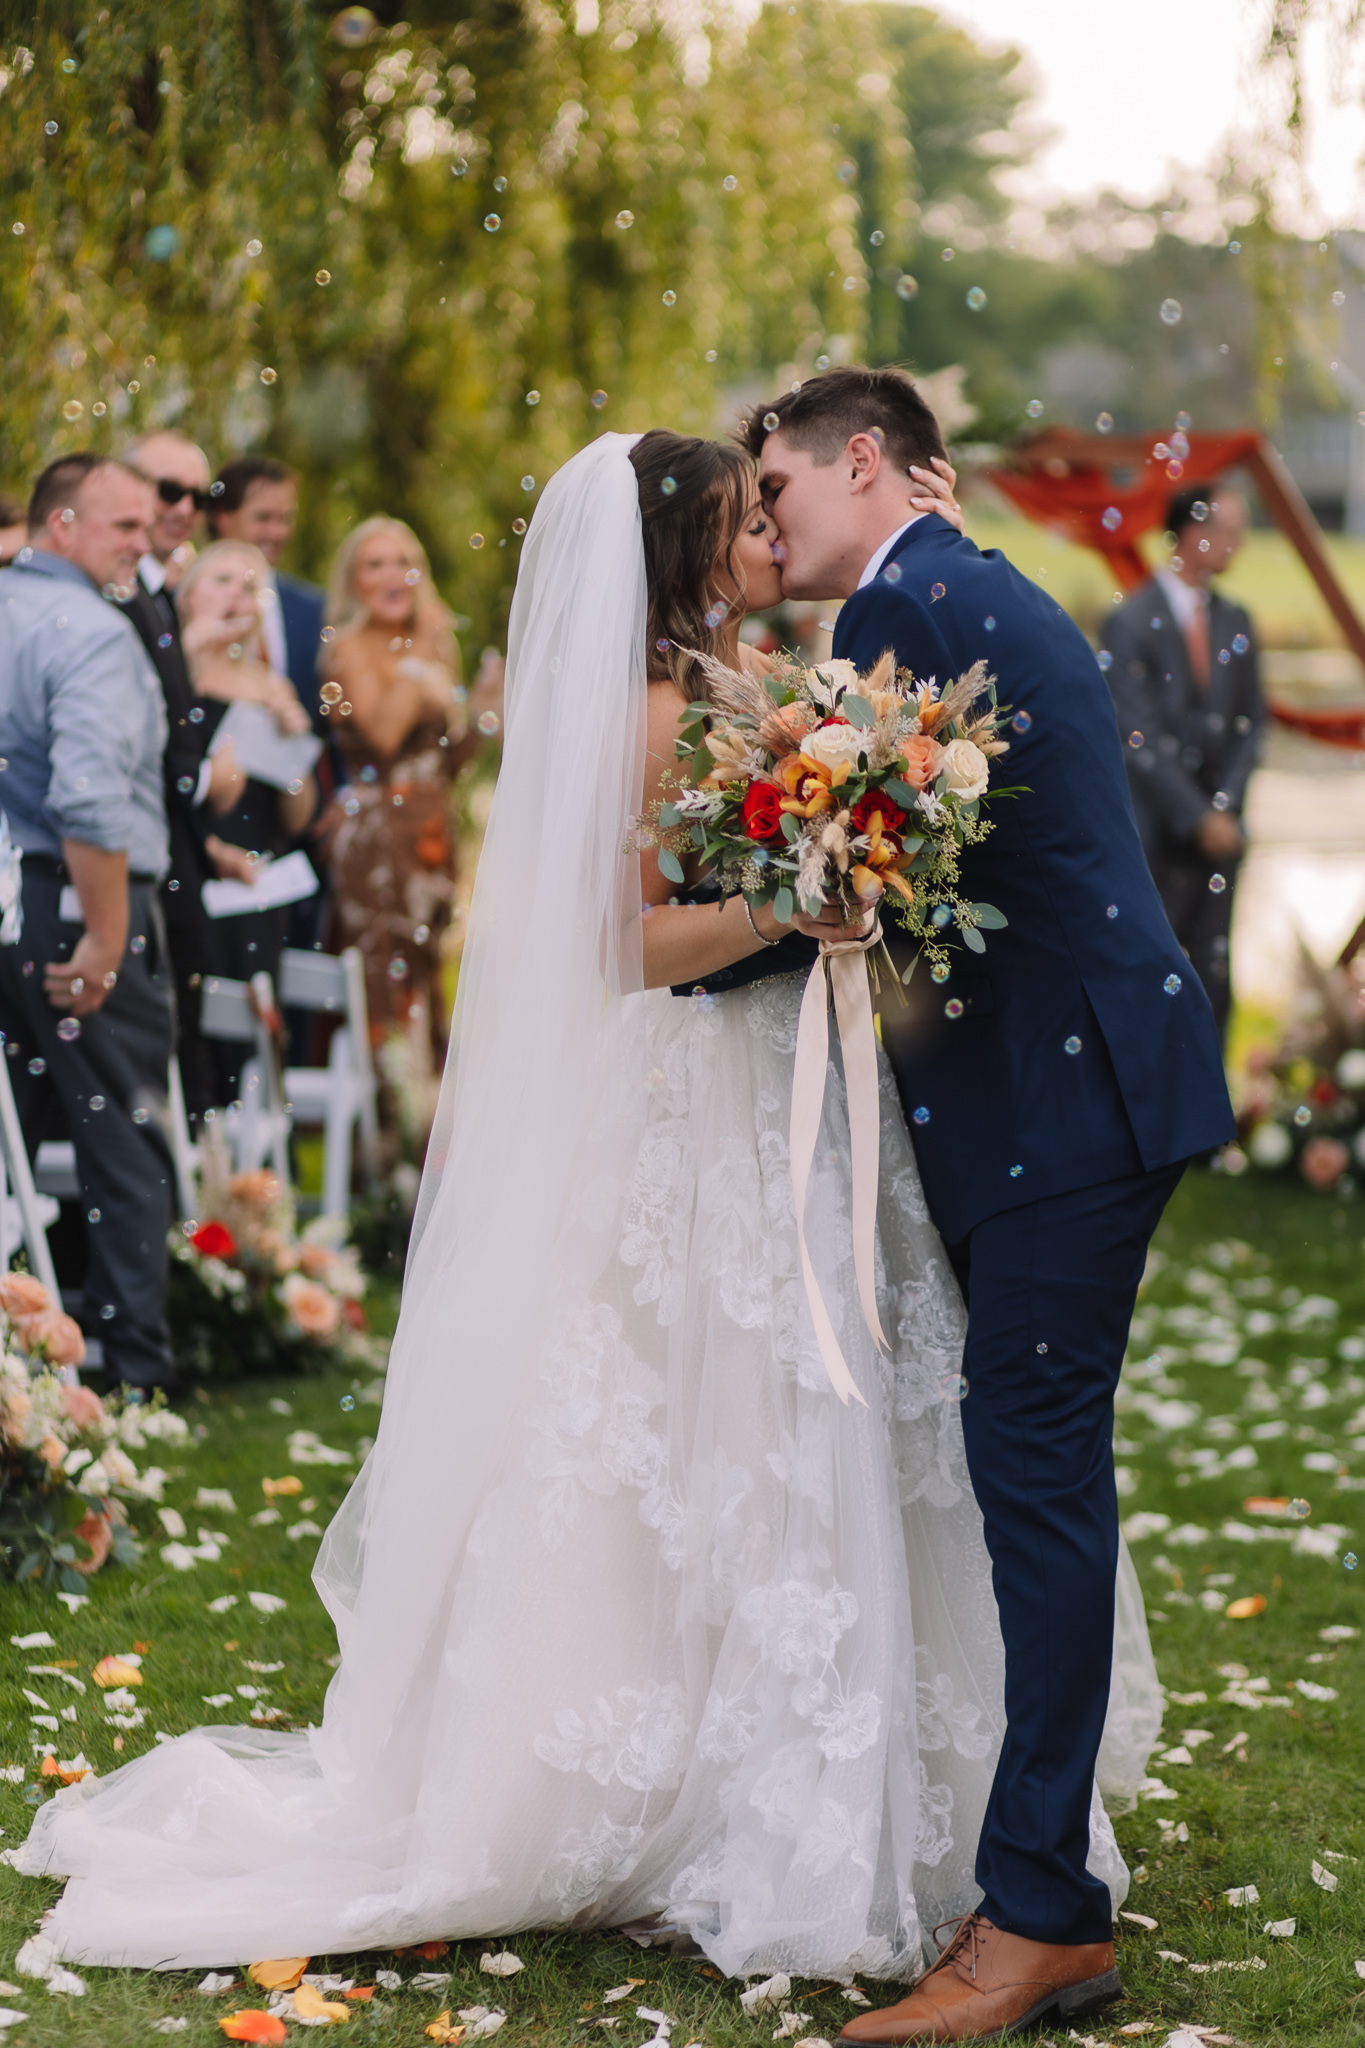 Bride and Groom kissing down the aisle as guests blow bubbles towards them